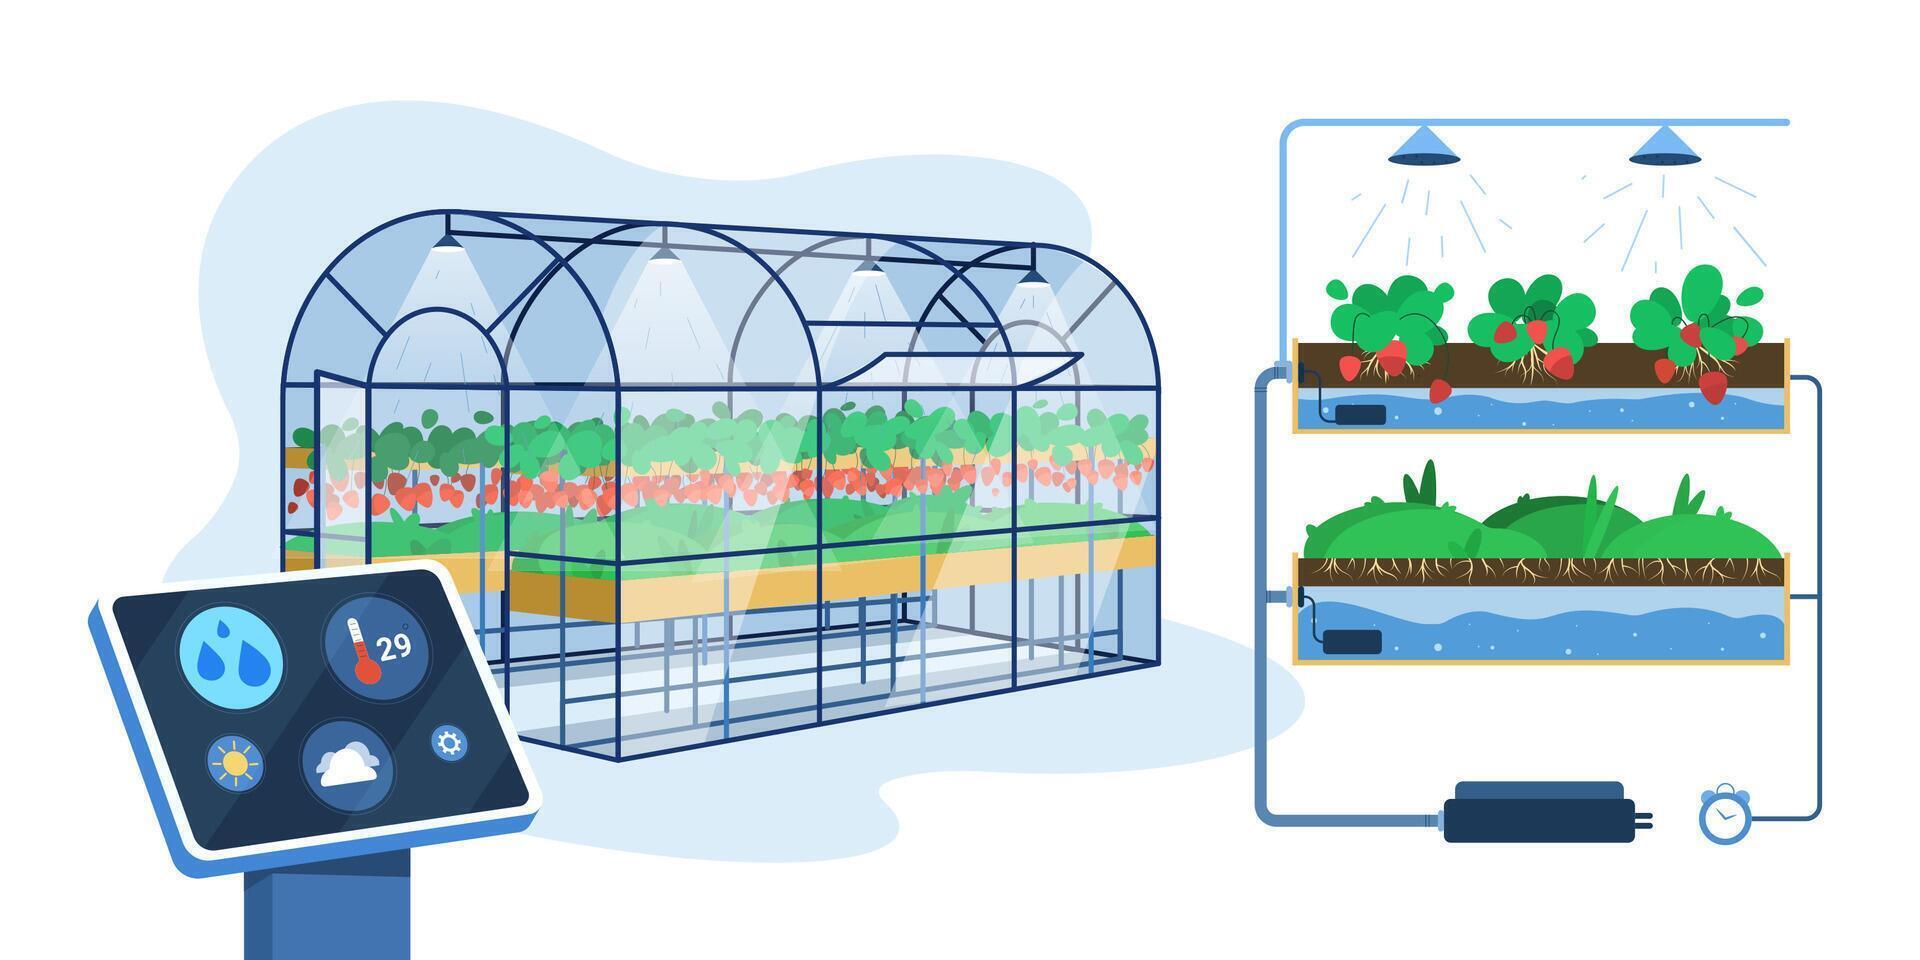 Flat greenhouse with smart innovation technology for growing or automation watering plants. Agricultural cultivation, hydroponic gardening system with control digital device. Farm industry concept. vector